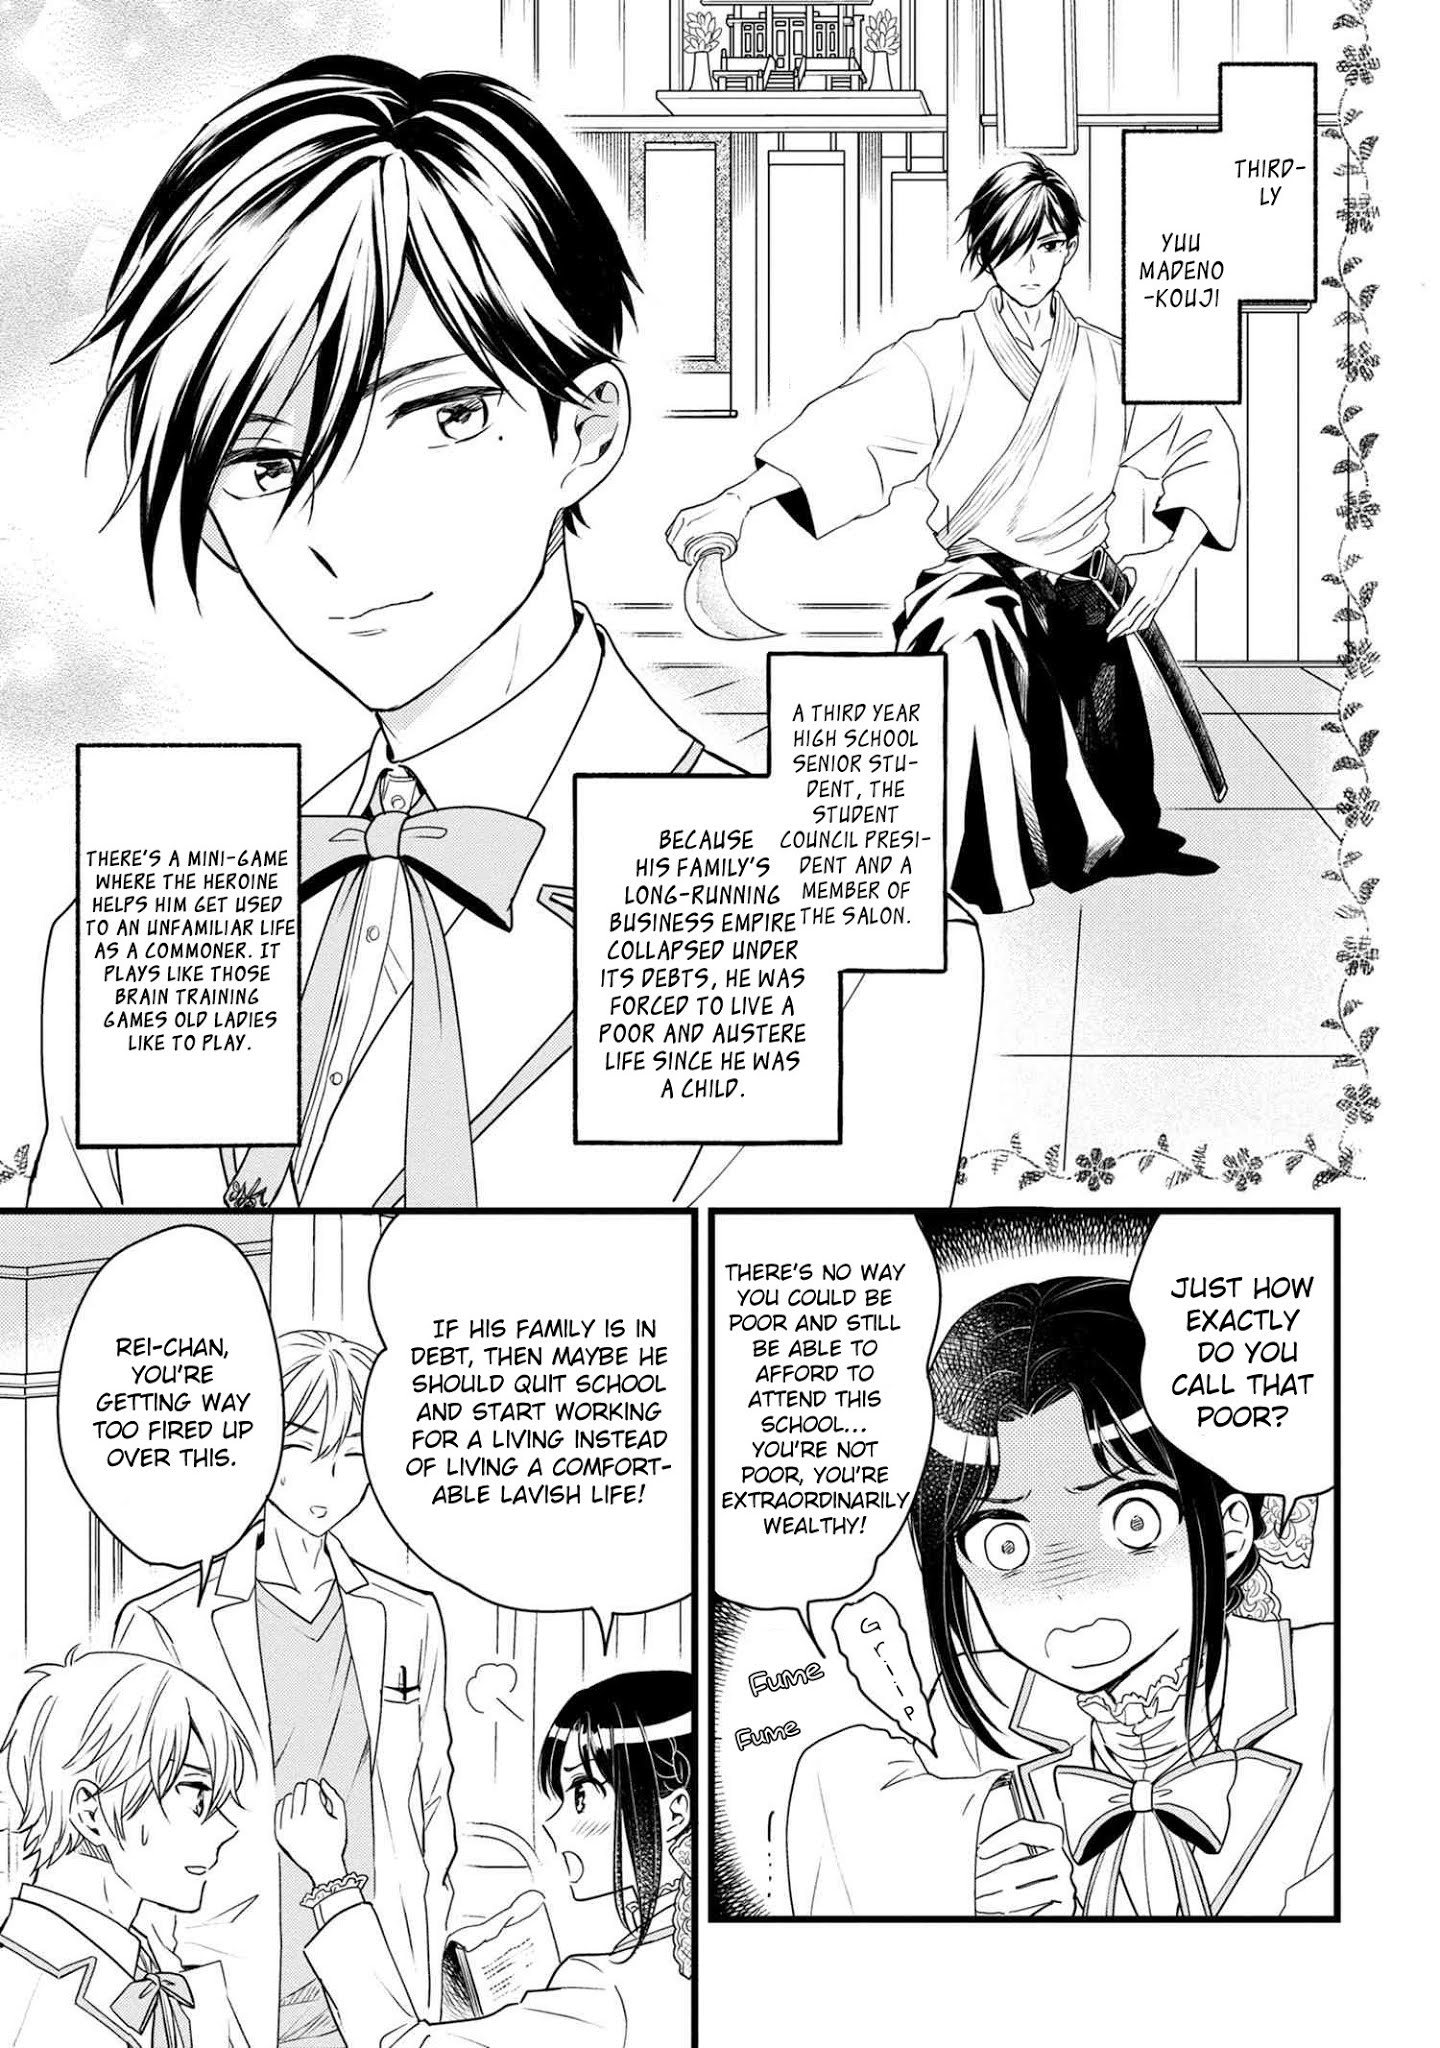 Reiko's Style: Despite Being Mistaken For A Rich Villainess, She's Actually Just Penniless Chapter 3 #12